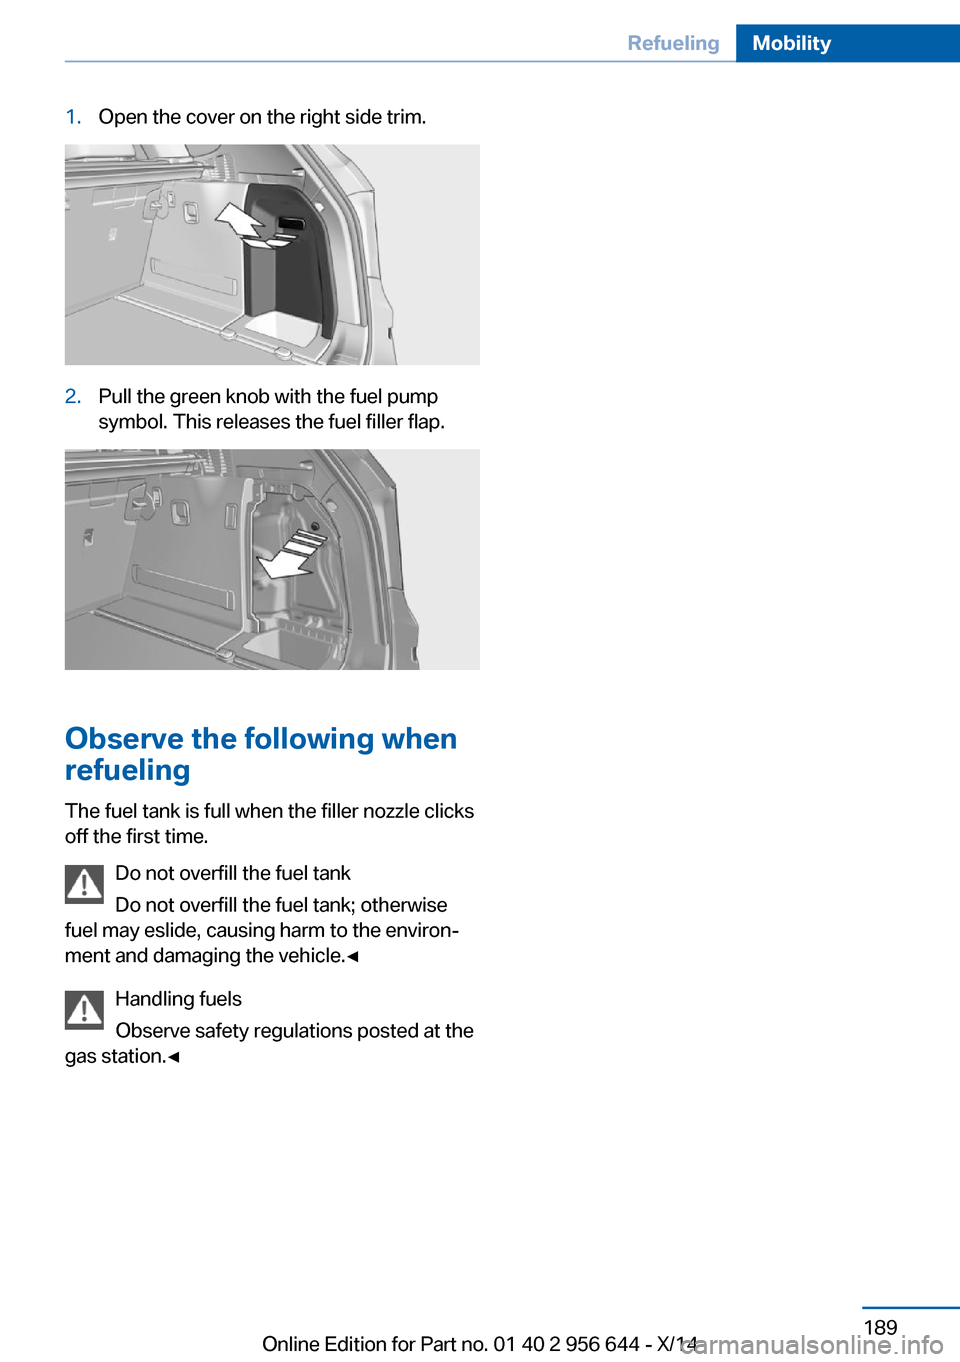 BMW X3 2014 F25 Owners Guide 1.Open the cover on the right side trim.2.Pull the green knob with the fuel pump
symbol. This releases the fuel filler flap.
Observe the following when
refueling
The fuel tank is full when the filler 